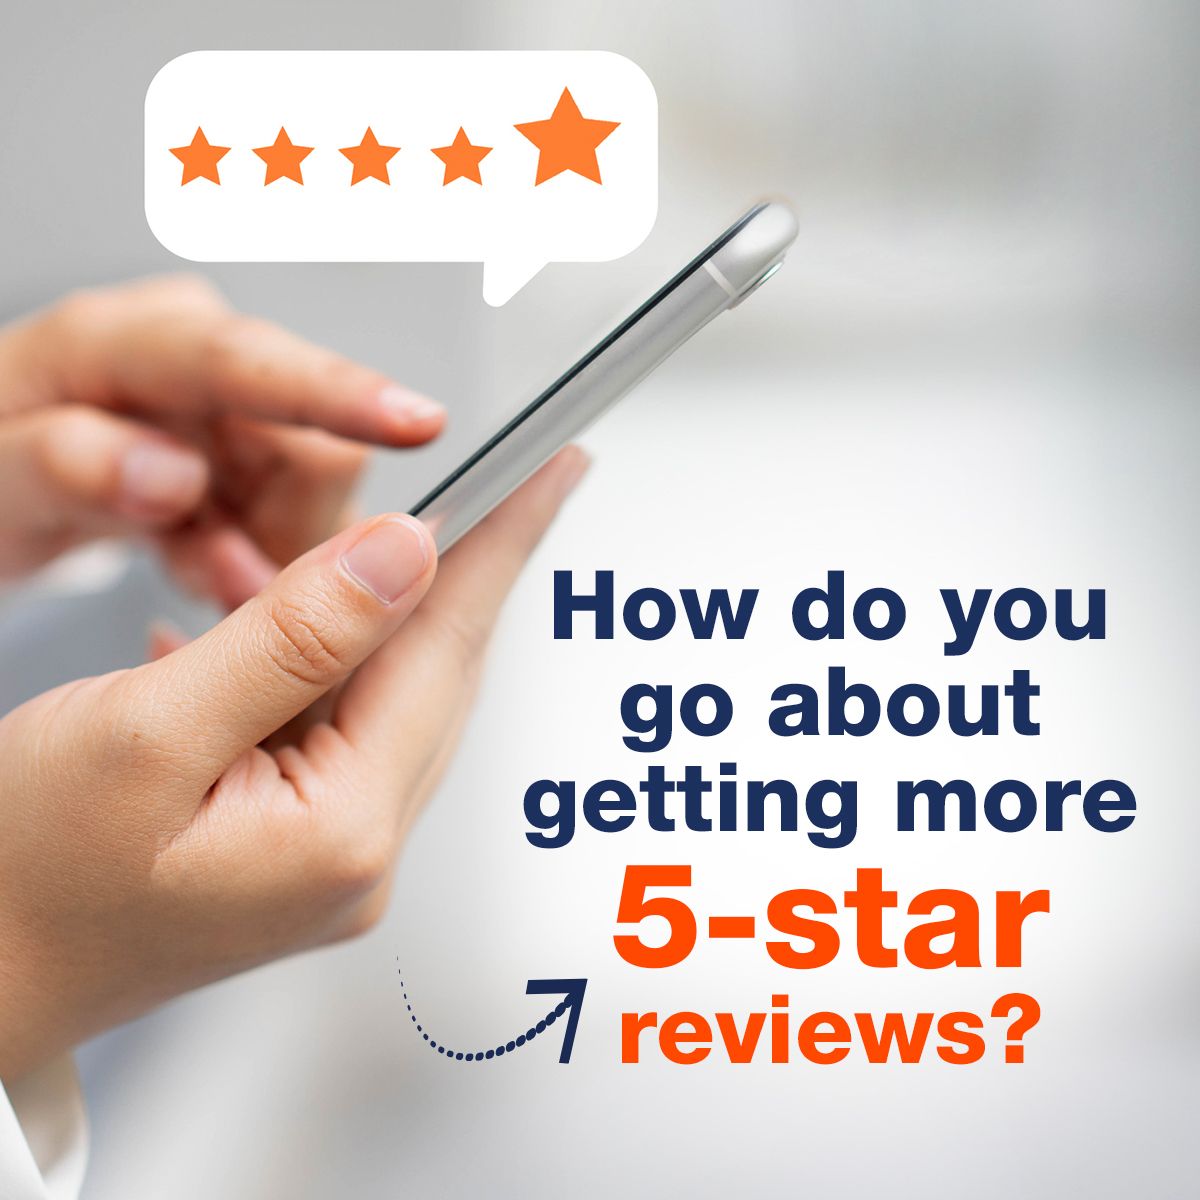 How do you go about getting more 5-star reviews?